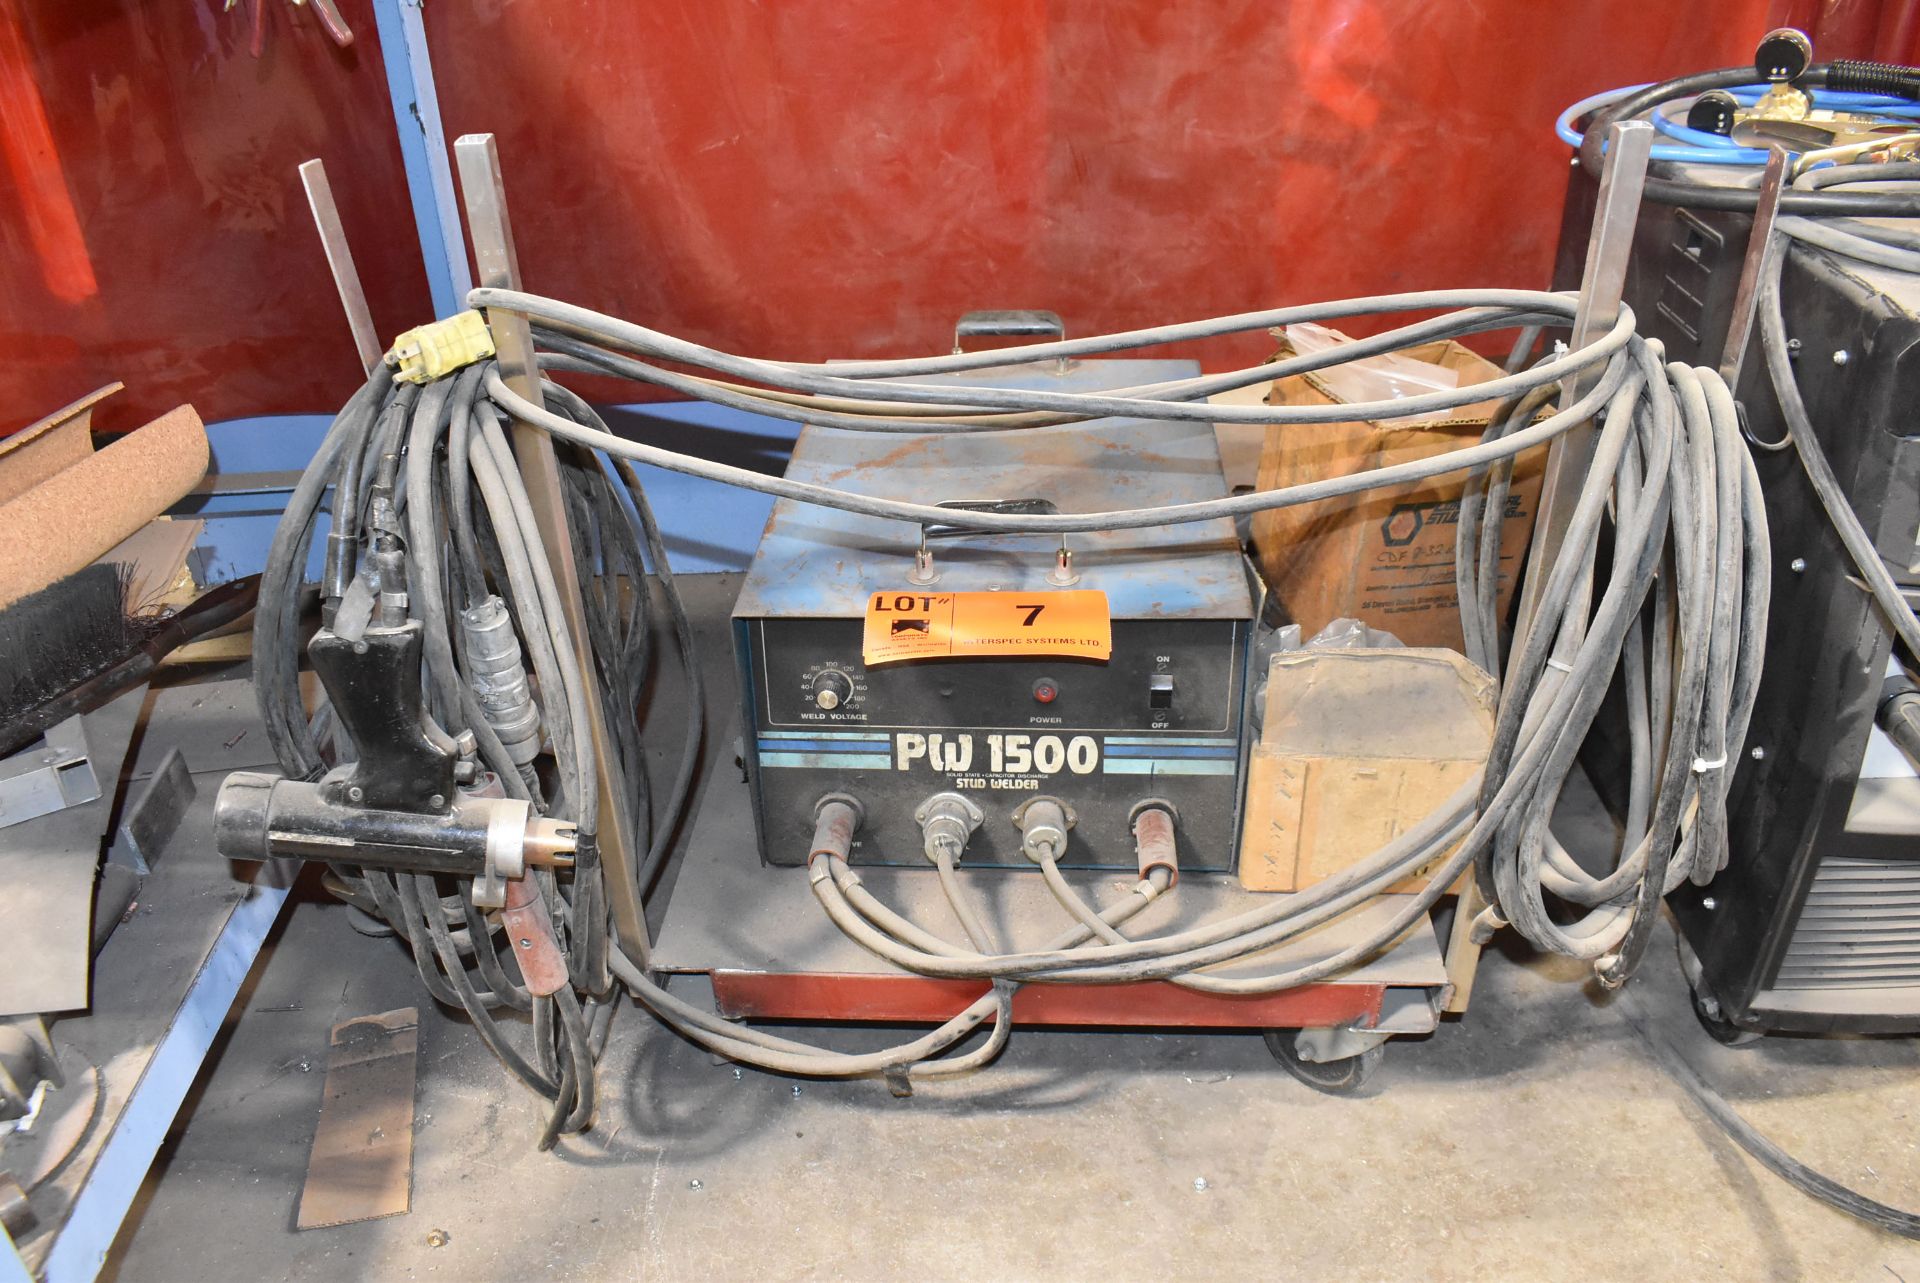 ERICO JONES PW1500 STUD WELDER WITH CABLES AND GUN S/N 183140 [RIGGING FOR FOR LOT #7 - $25 CAD PLUS - Image 2 of 4